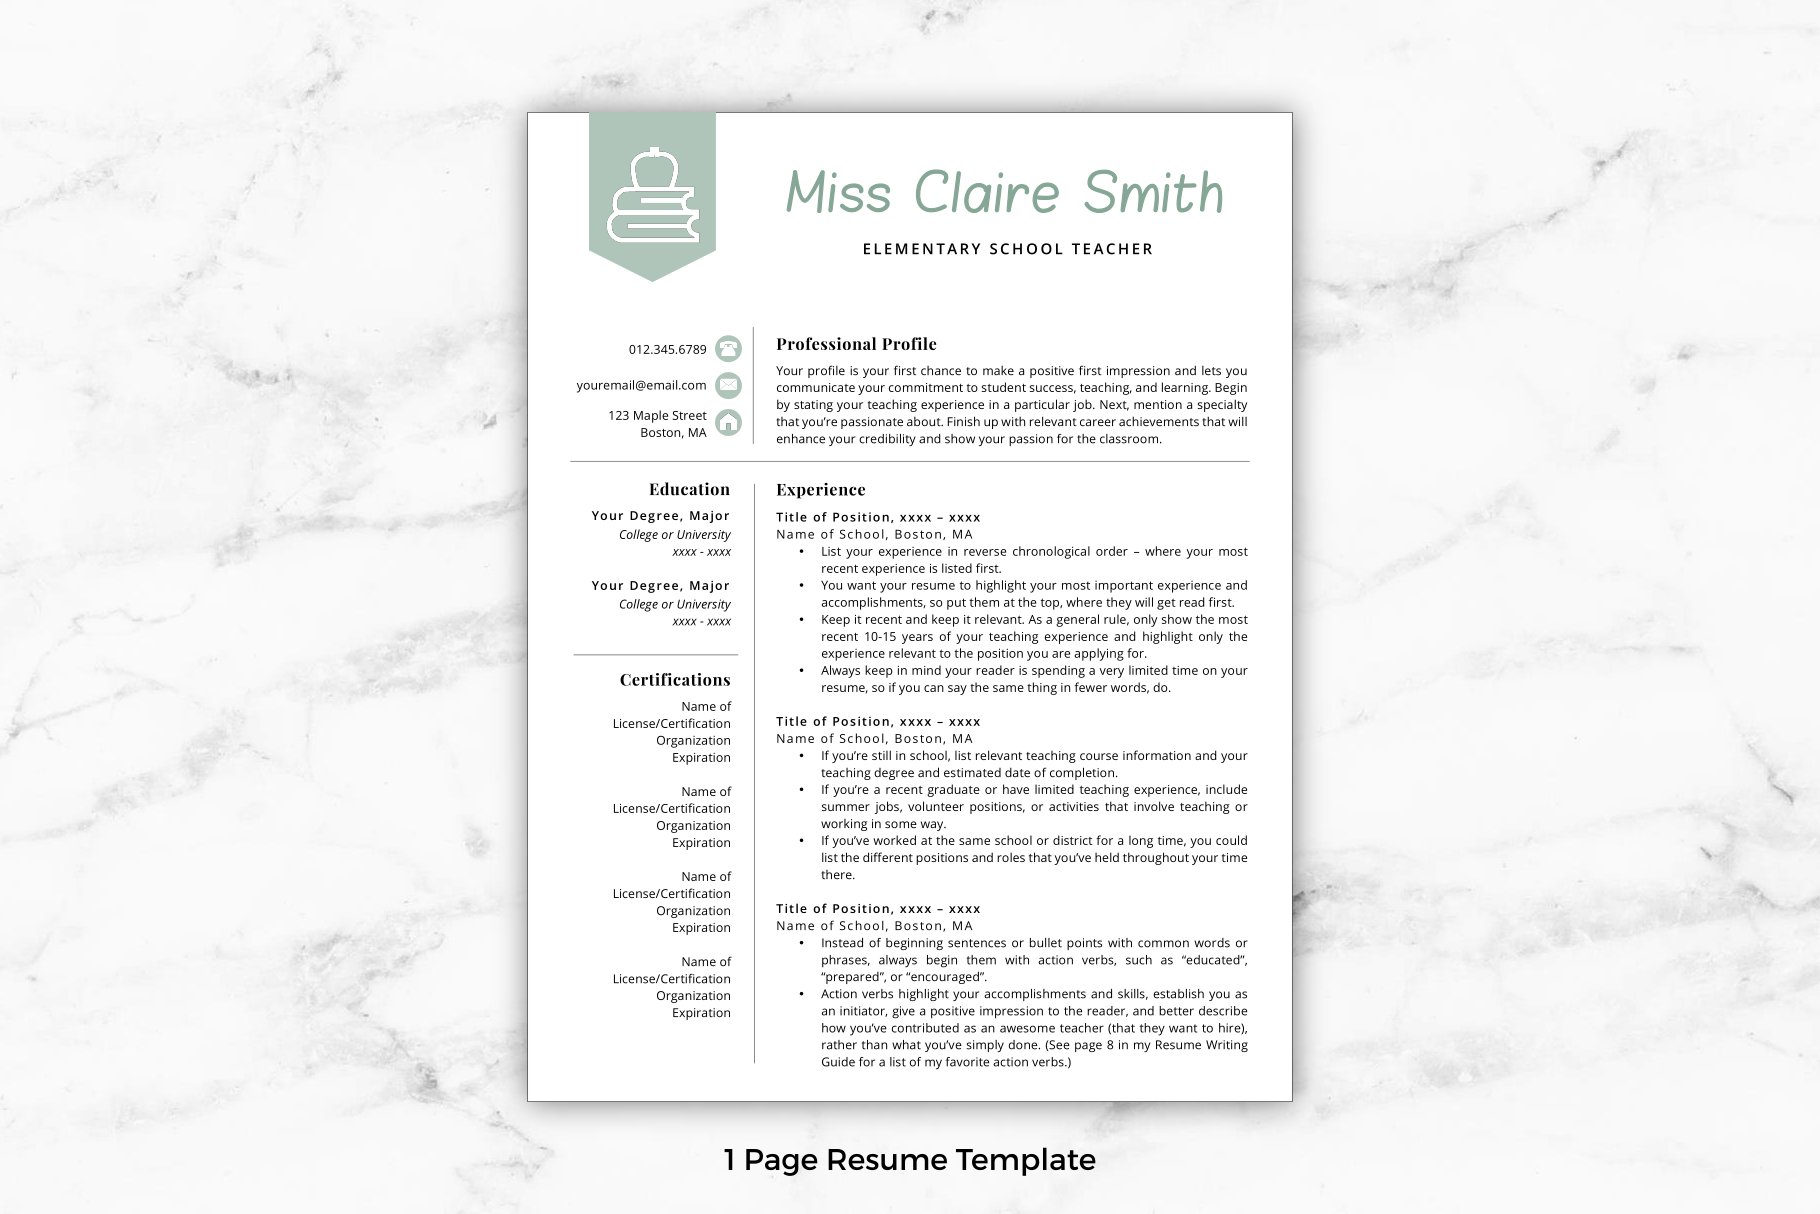 Teacher Resume Template - Claire preview image.